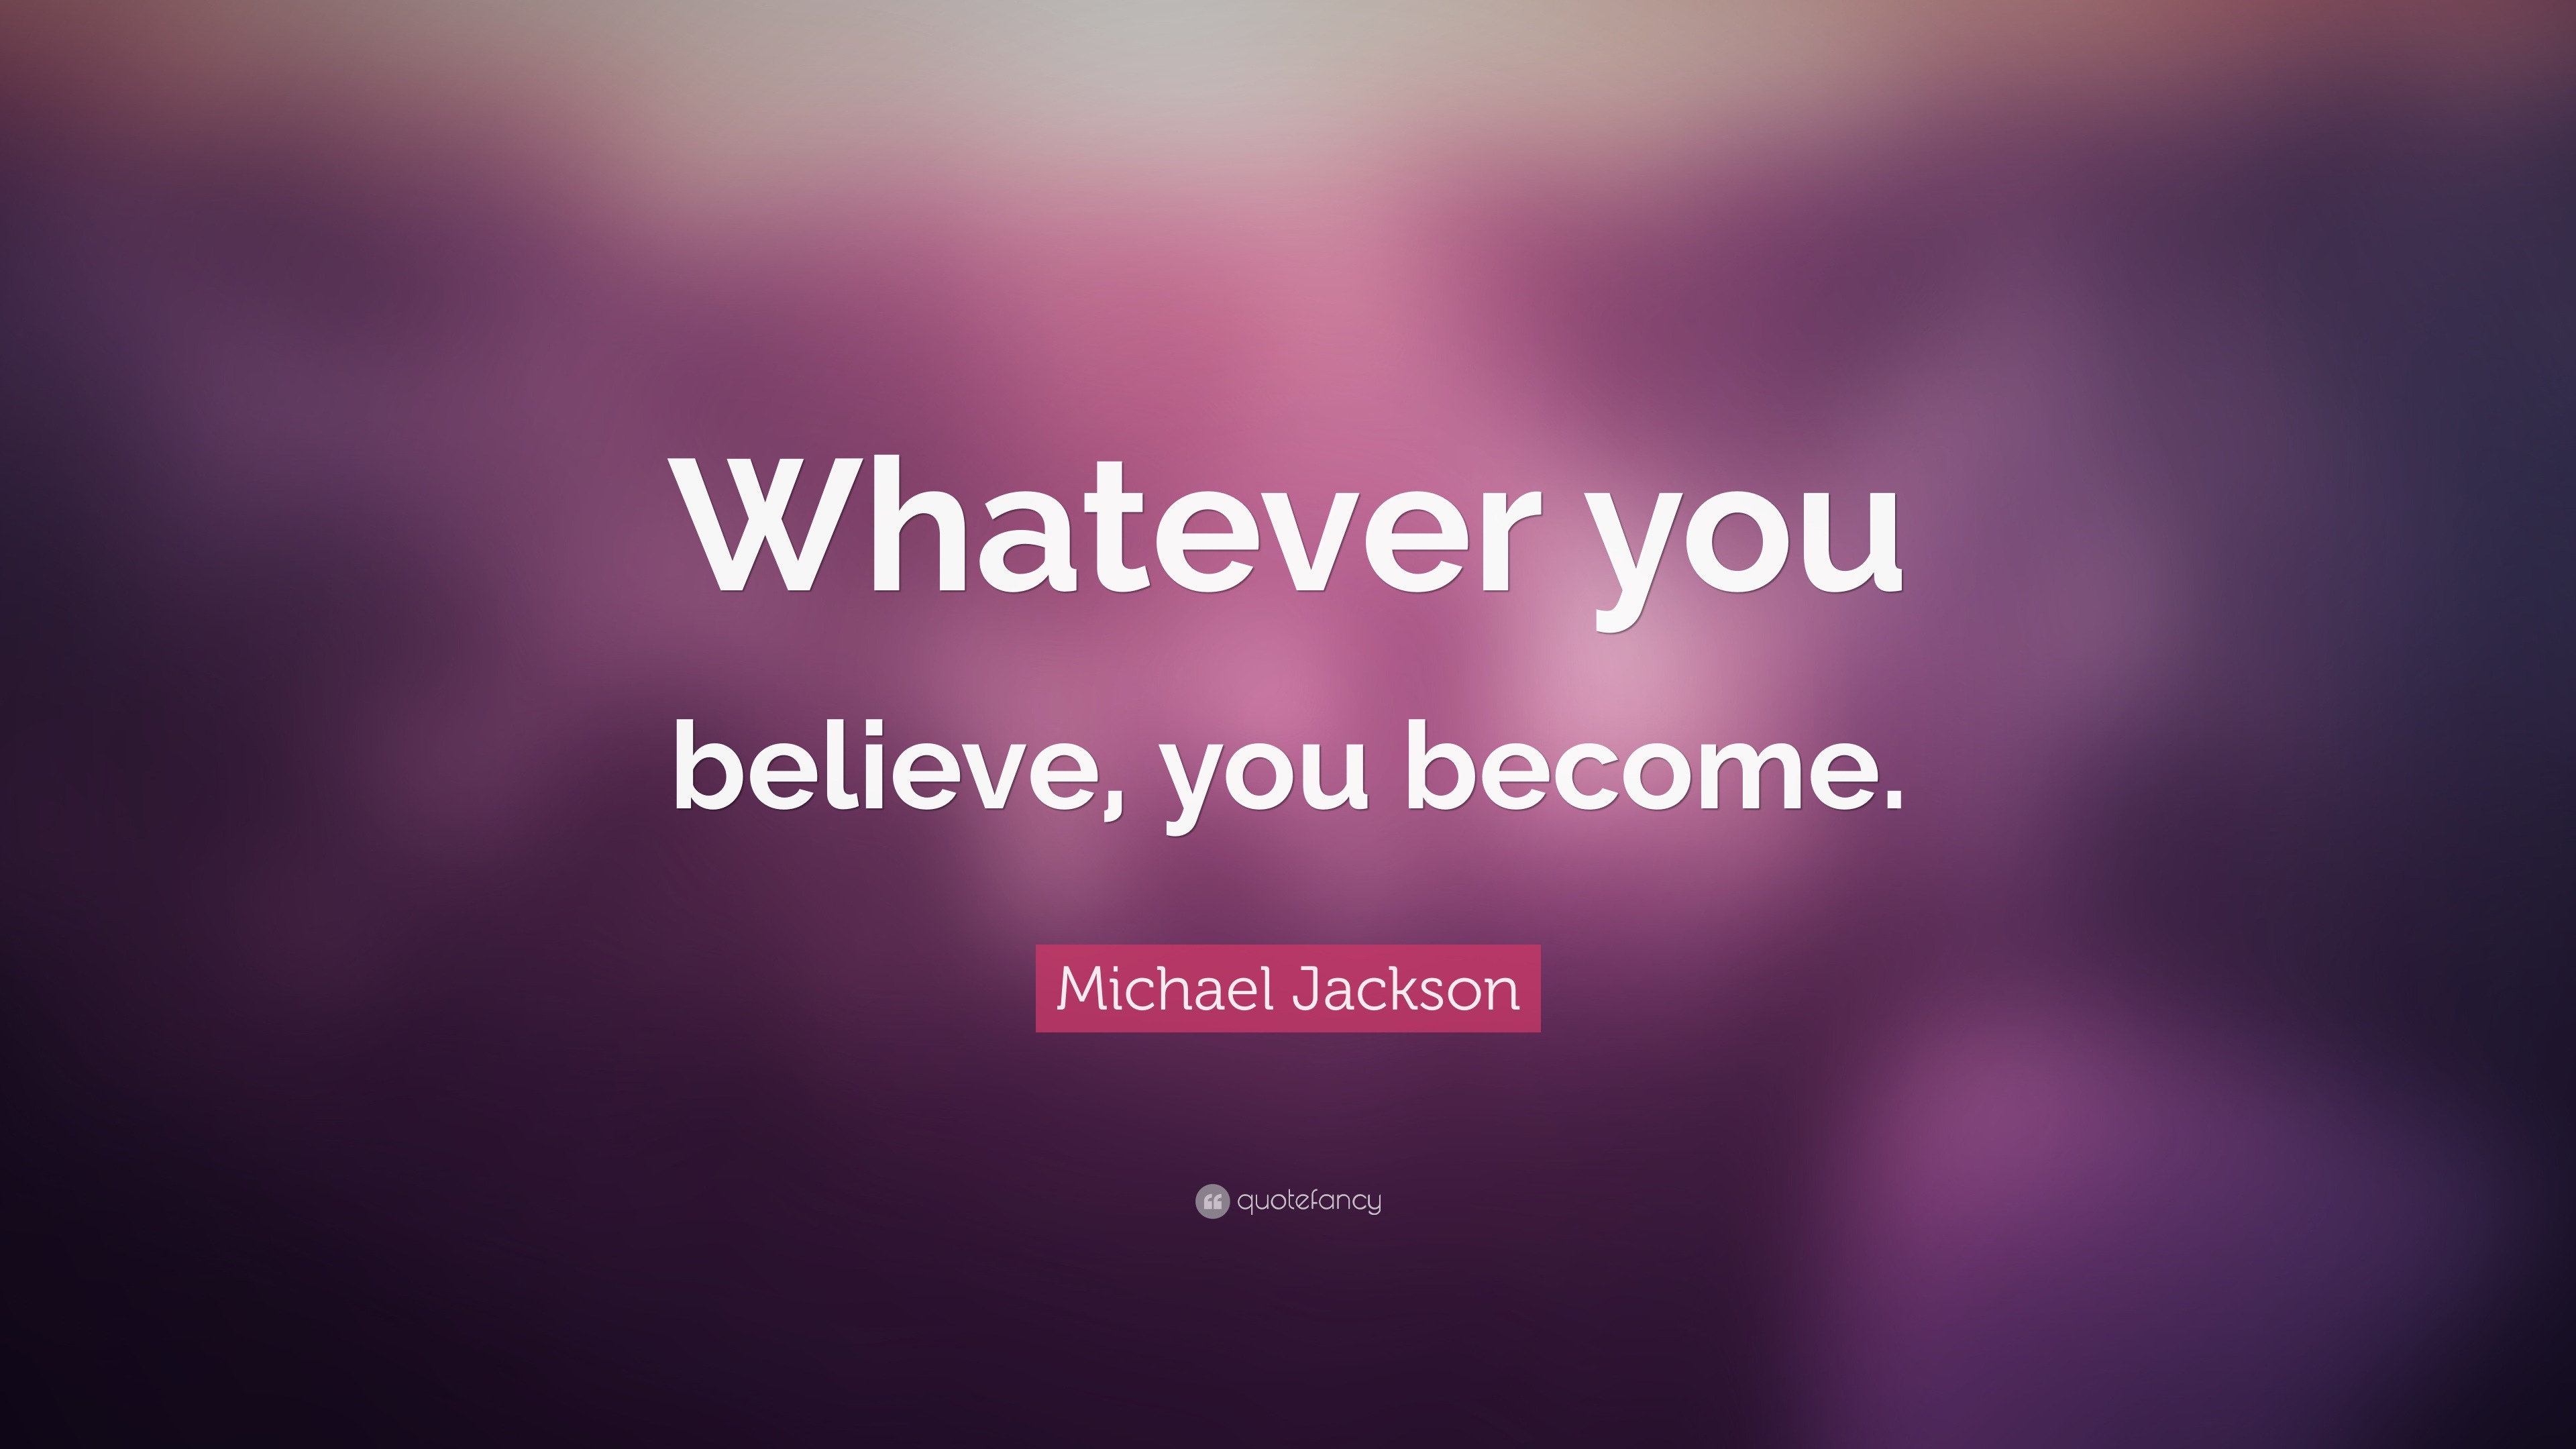 Michael Jackson Quote: “Whatever you believe, you become.”